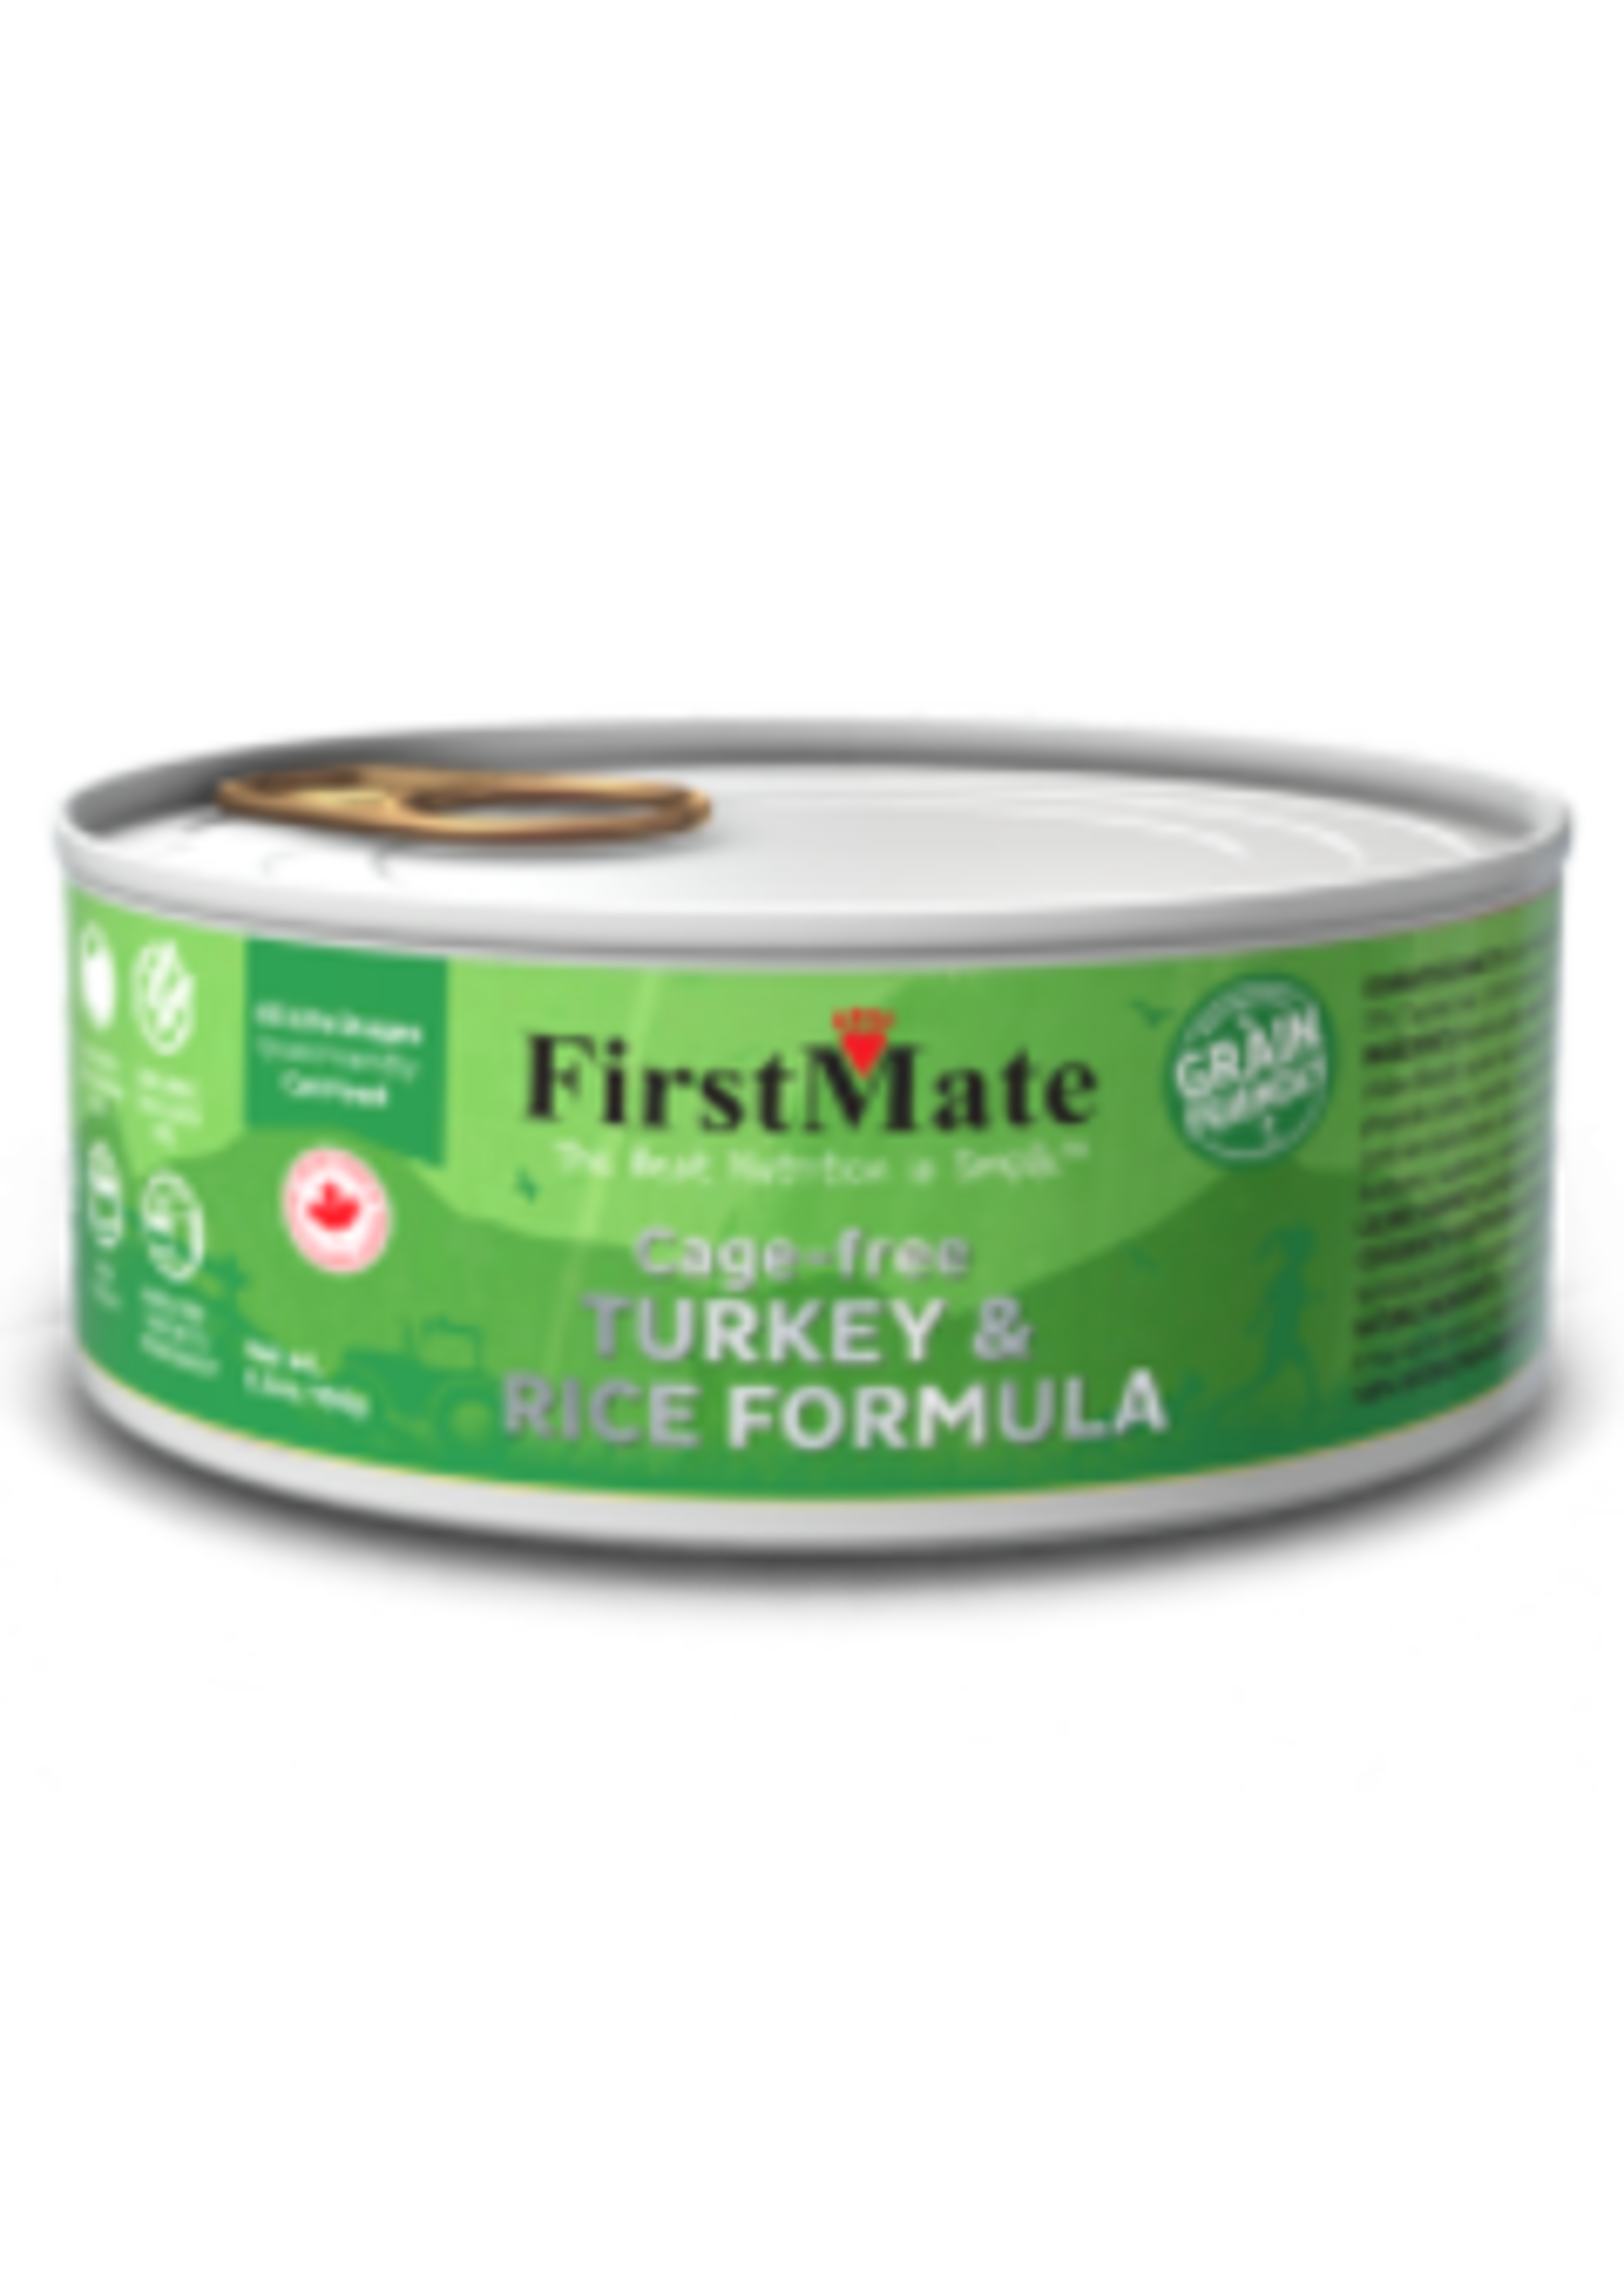 FirstMate FirstMate -GFriendly Cage Free Turkey/Rice Cat 5.5oz